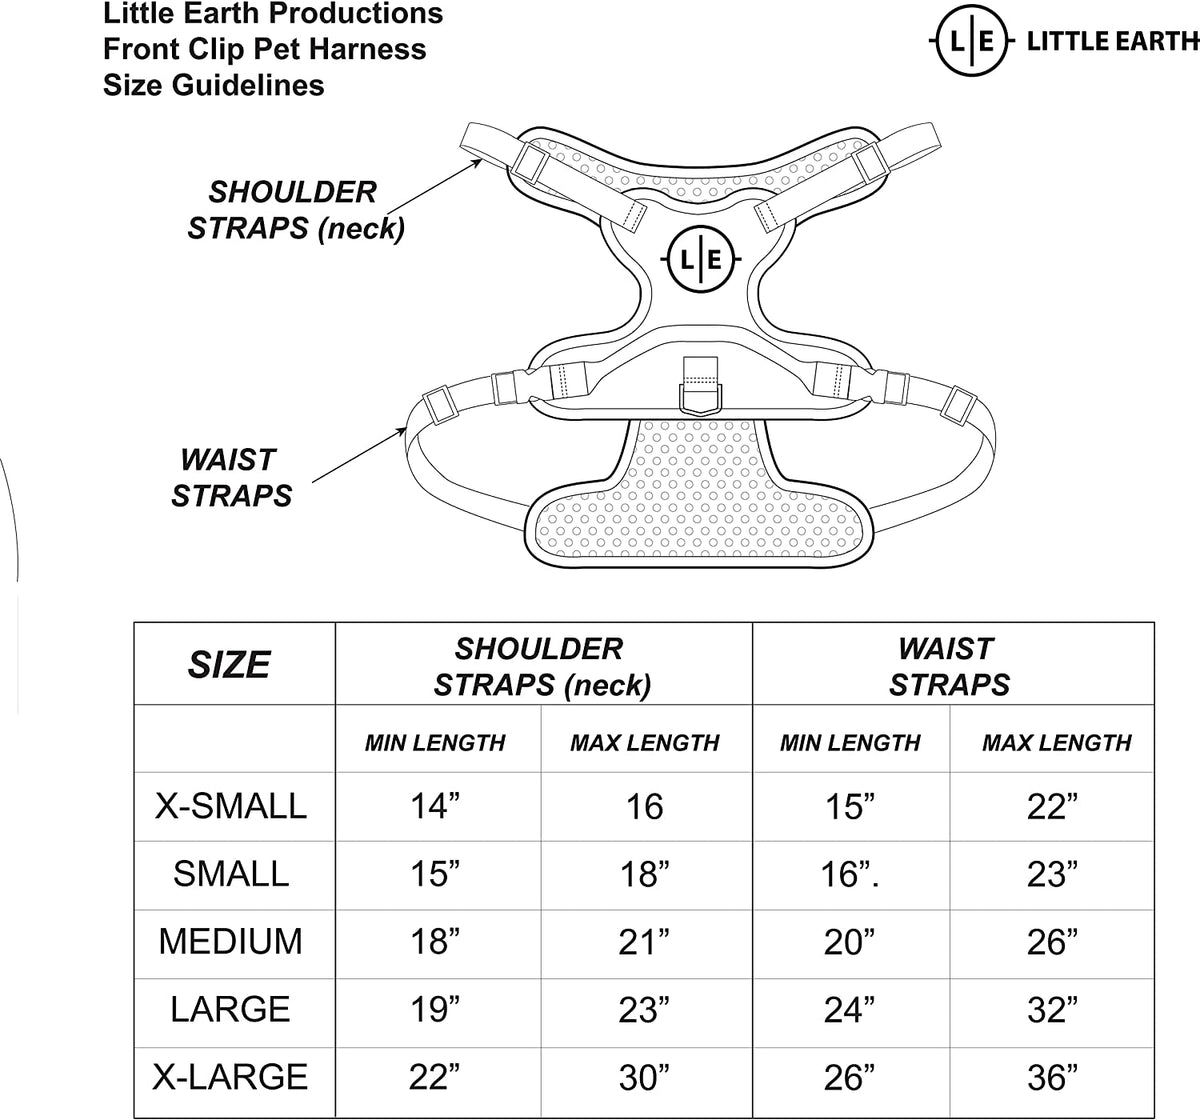 IA State Cyclones Front Clip Harness